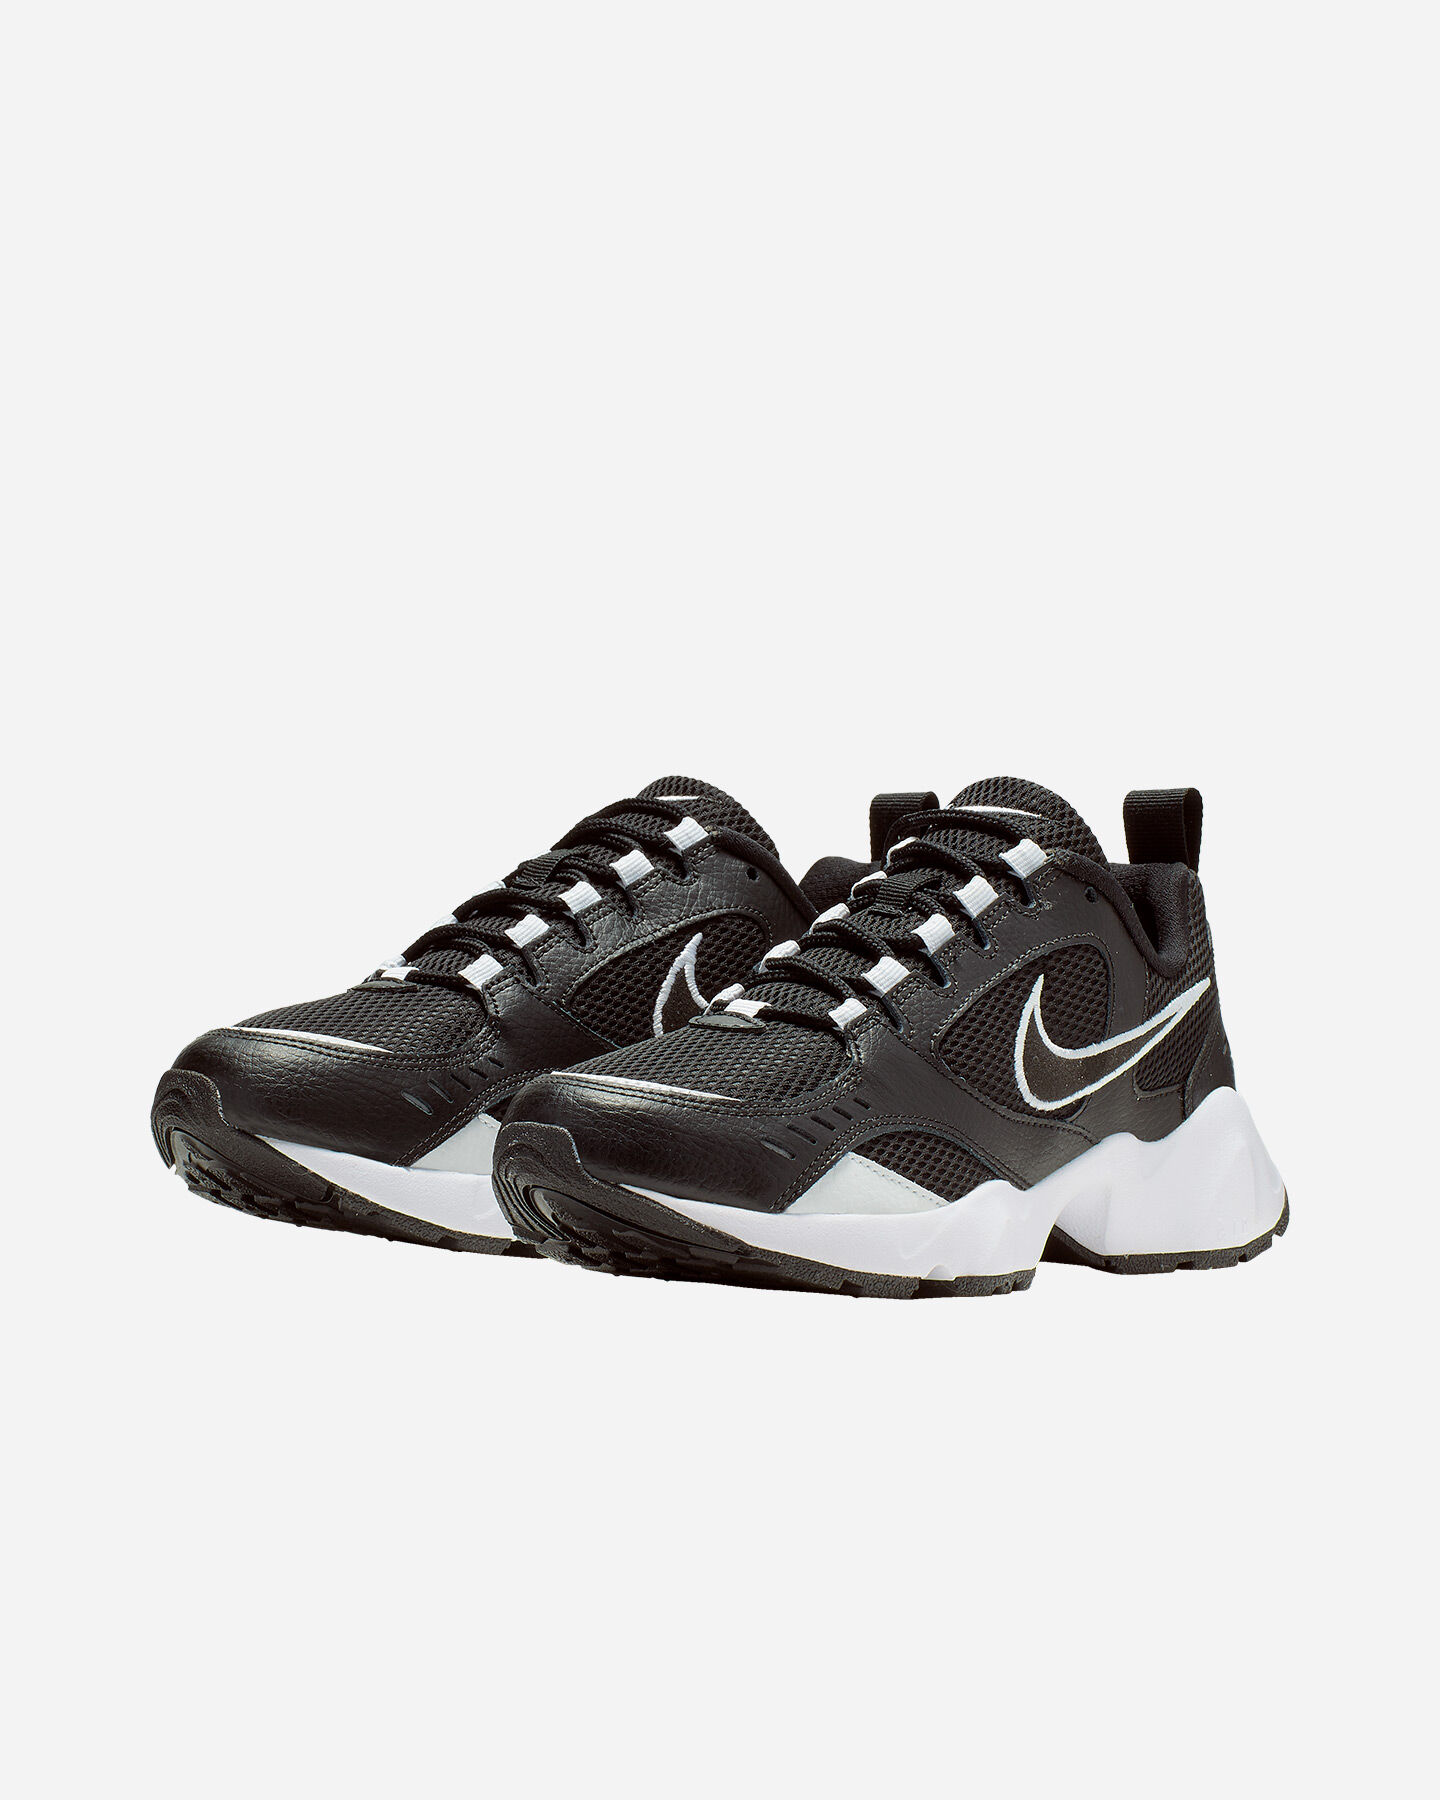  Scarpe sneakers NIKE AIR HEIGHTS W S5079141|001|5 scatto 1